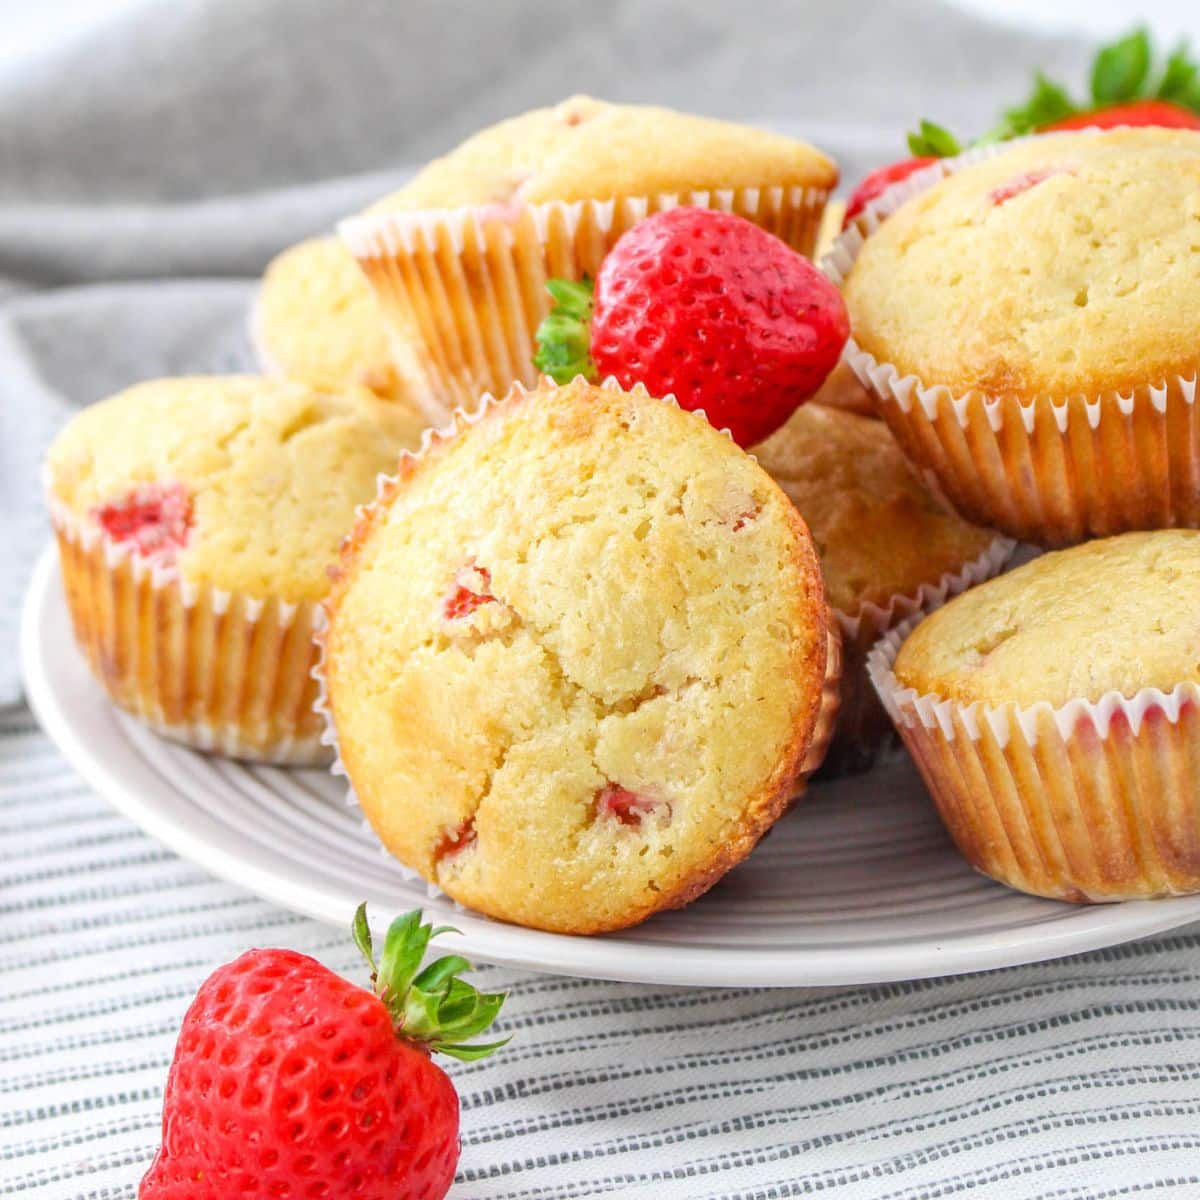 Strawberry White Chocolate Chip Muffins on a plate with a few fresh berries around the plate